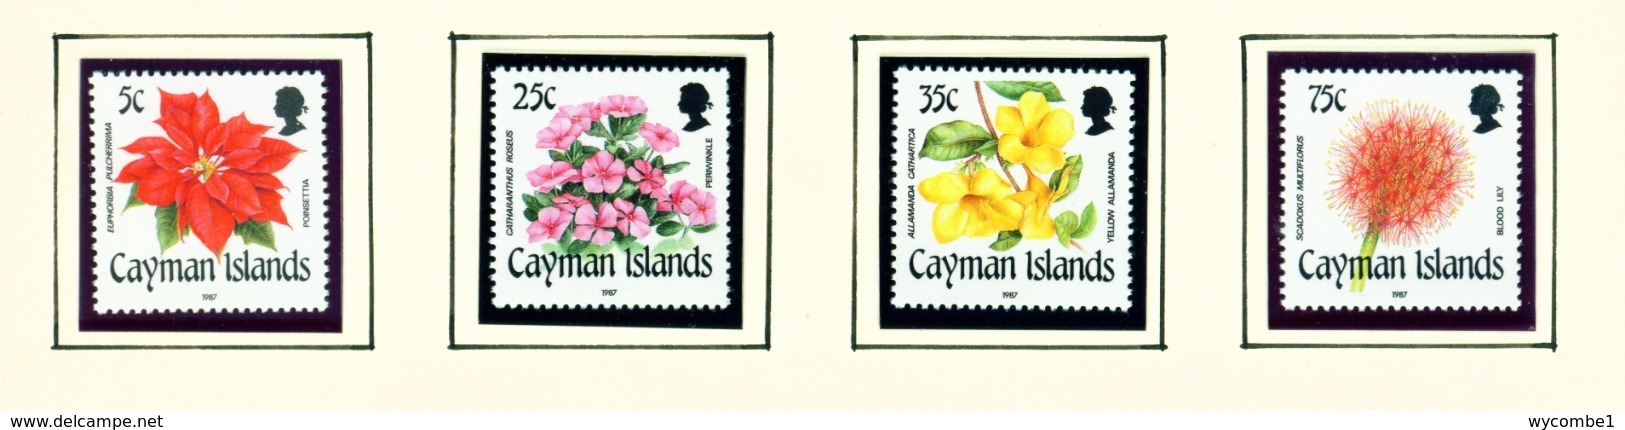 CAYMAN ISLANDS - 1987 Flowers Set Unmounted/Never Hinged Mint - Cayman Islands